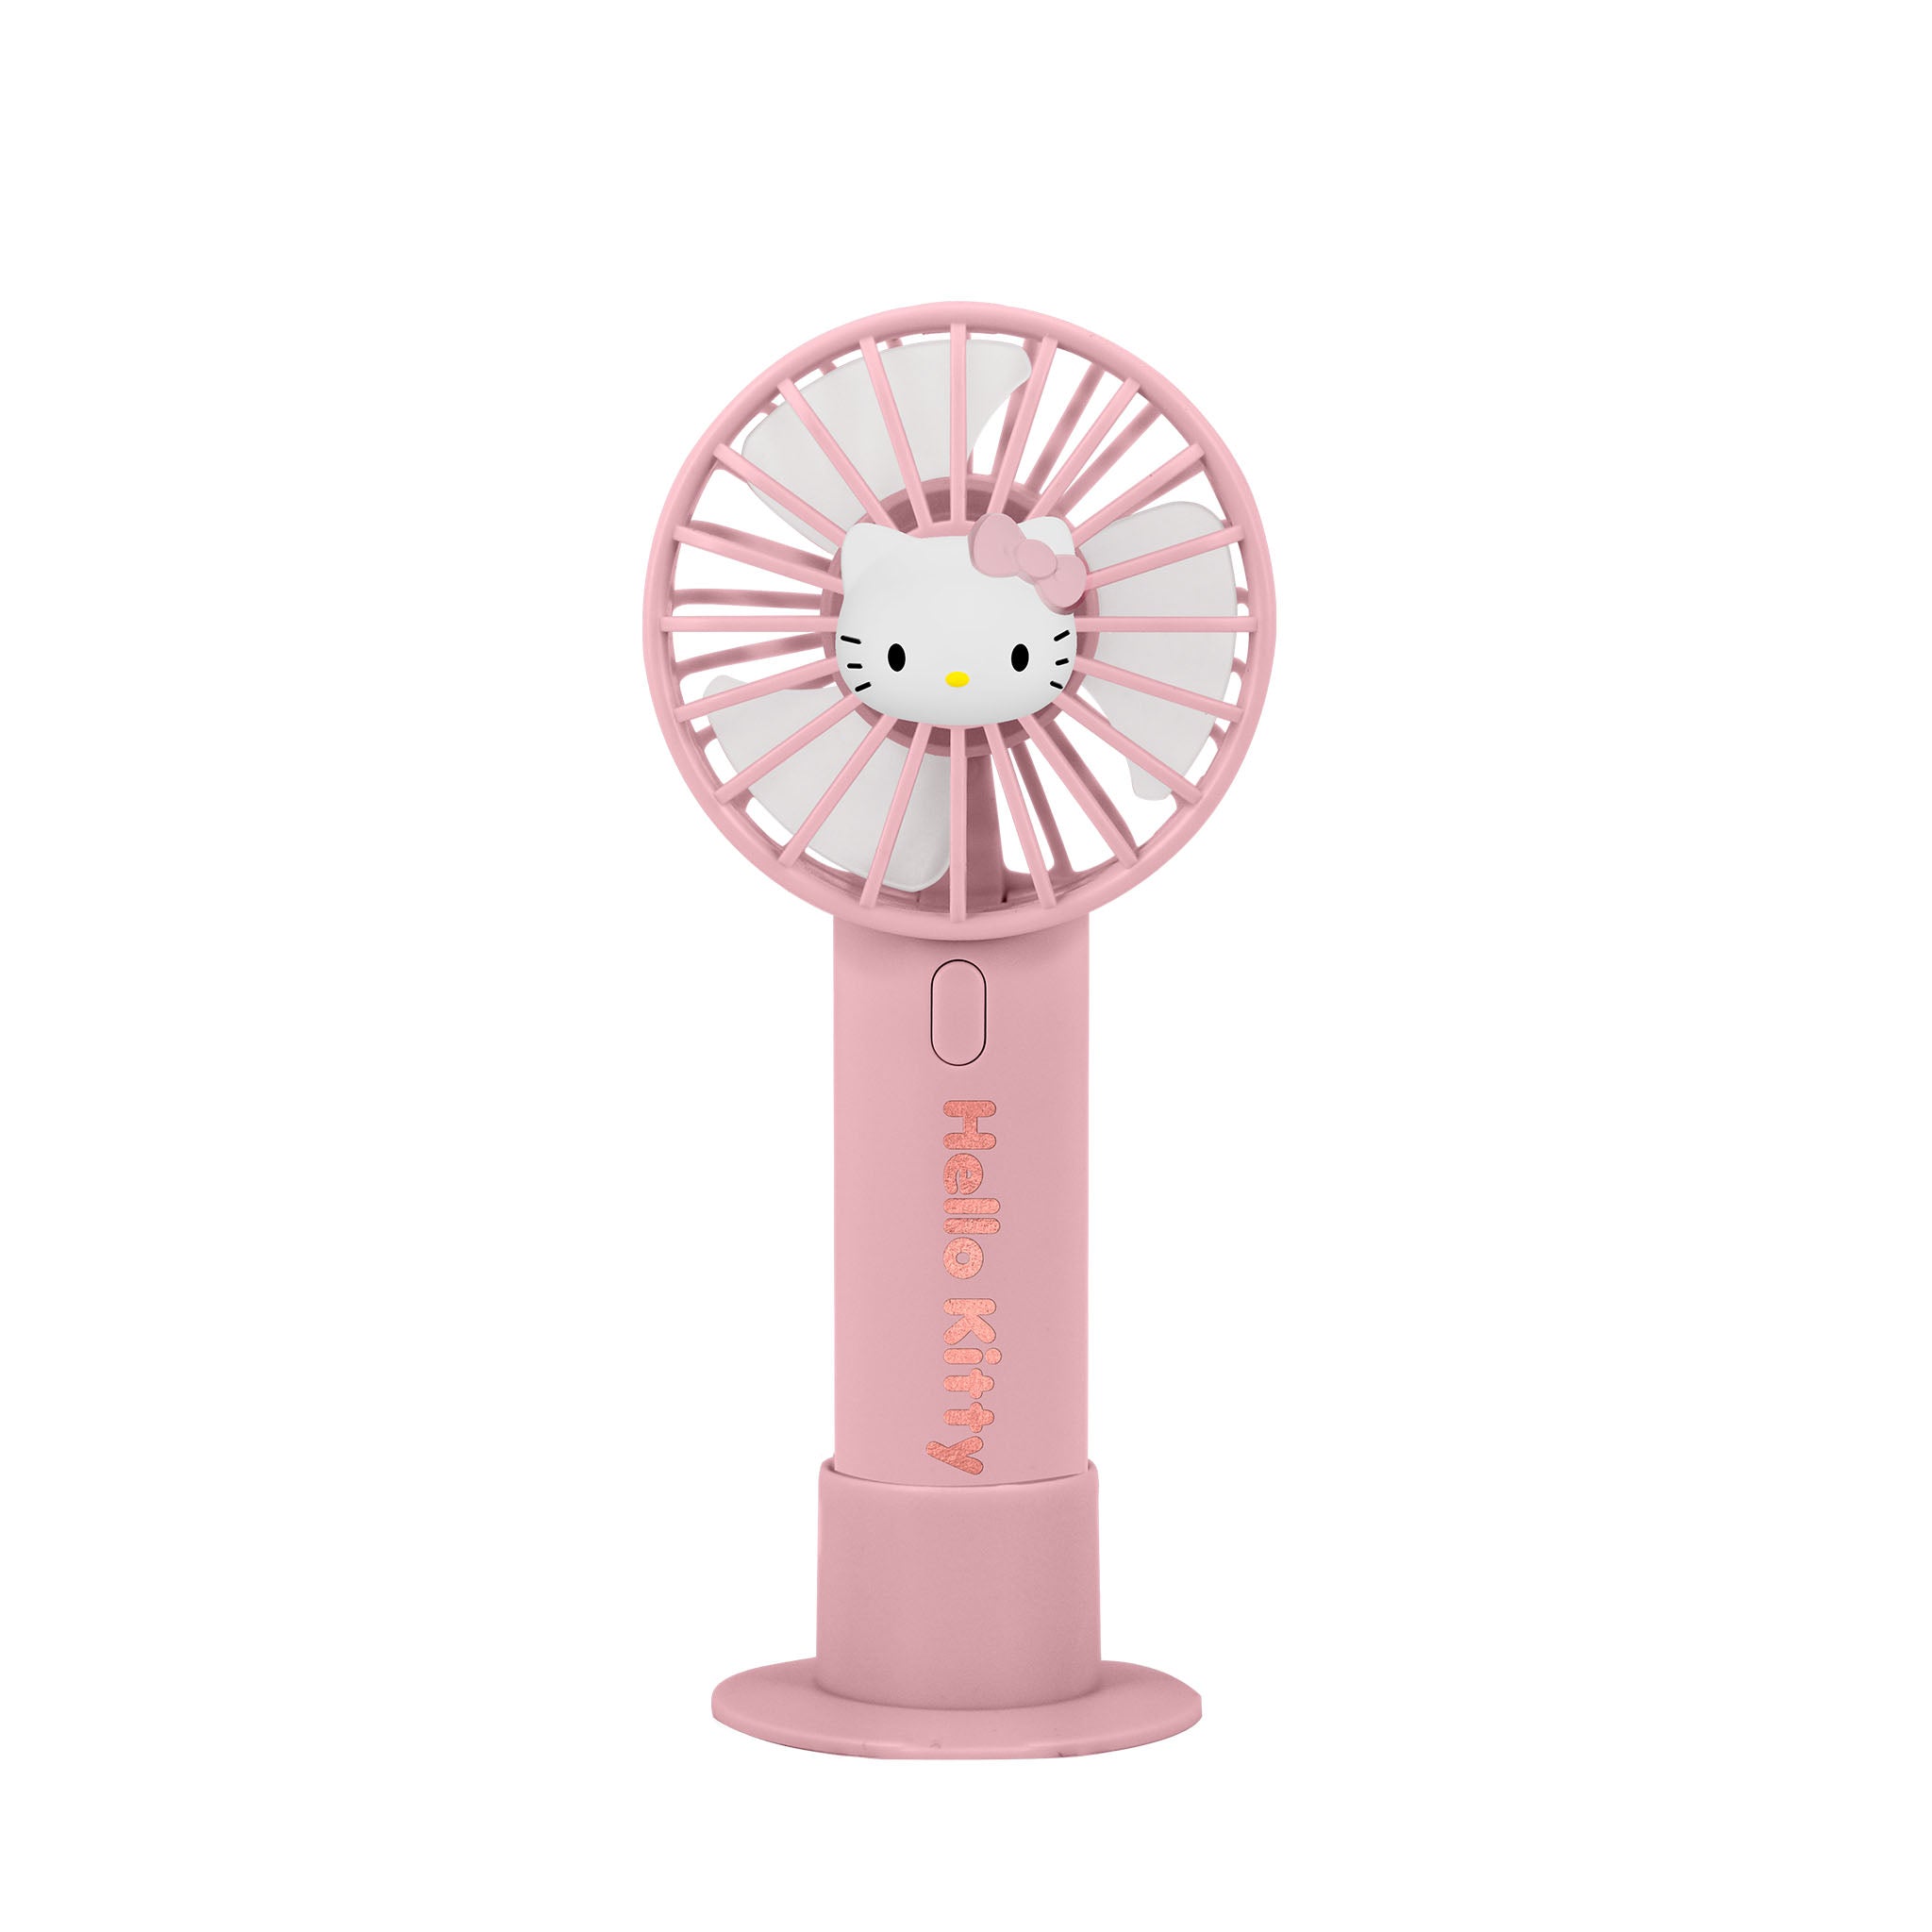 Hello Kitty Rechargeable Handheld fan - soft pink/rose gold